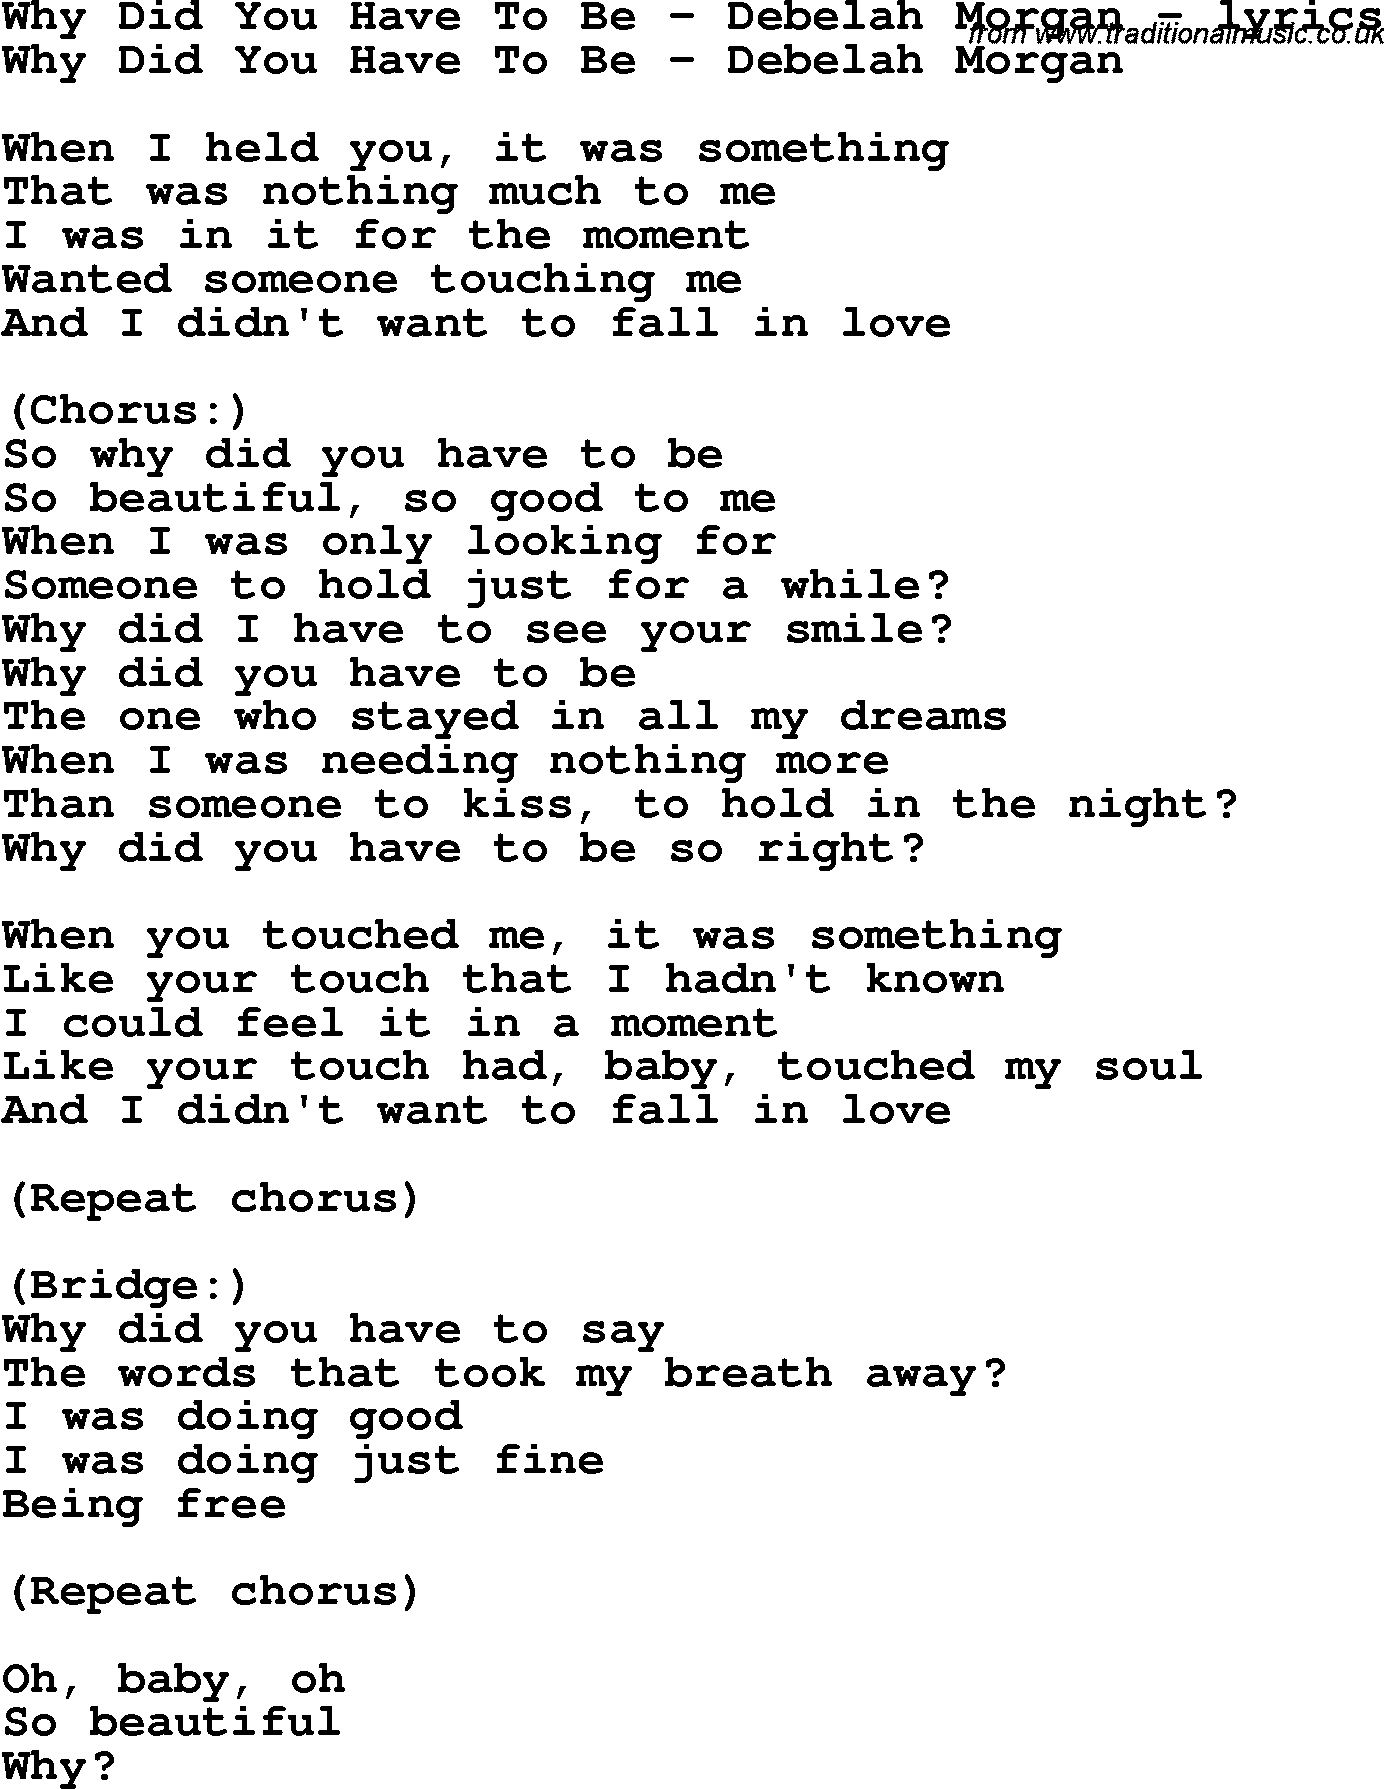 Love Song Lyrics for: Why Did You Have To Be - Debelah Morgan